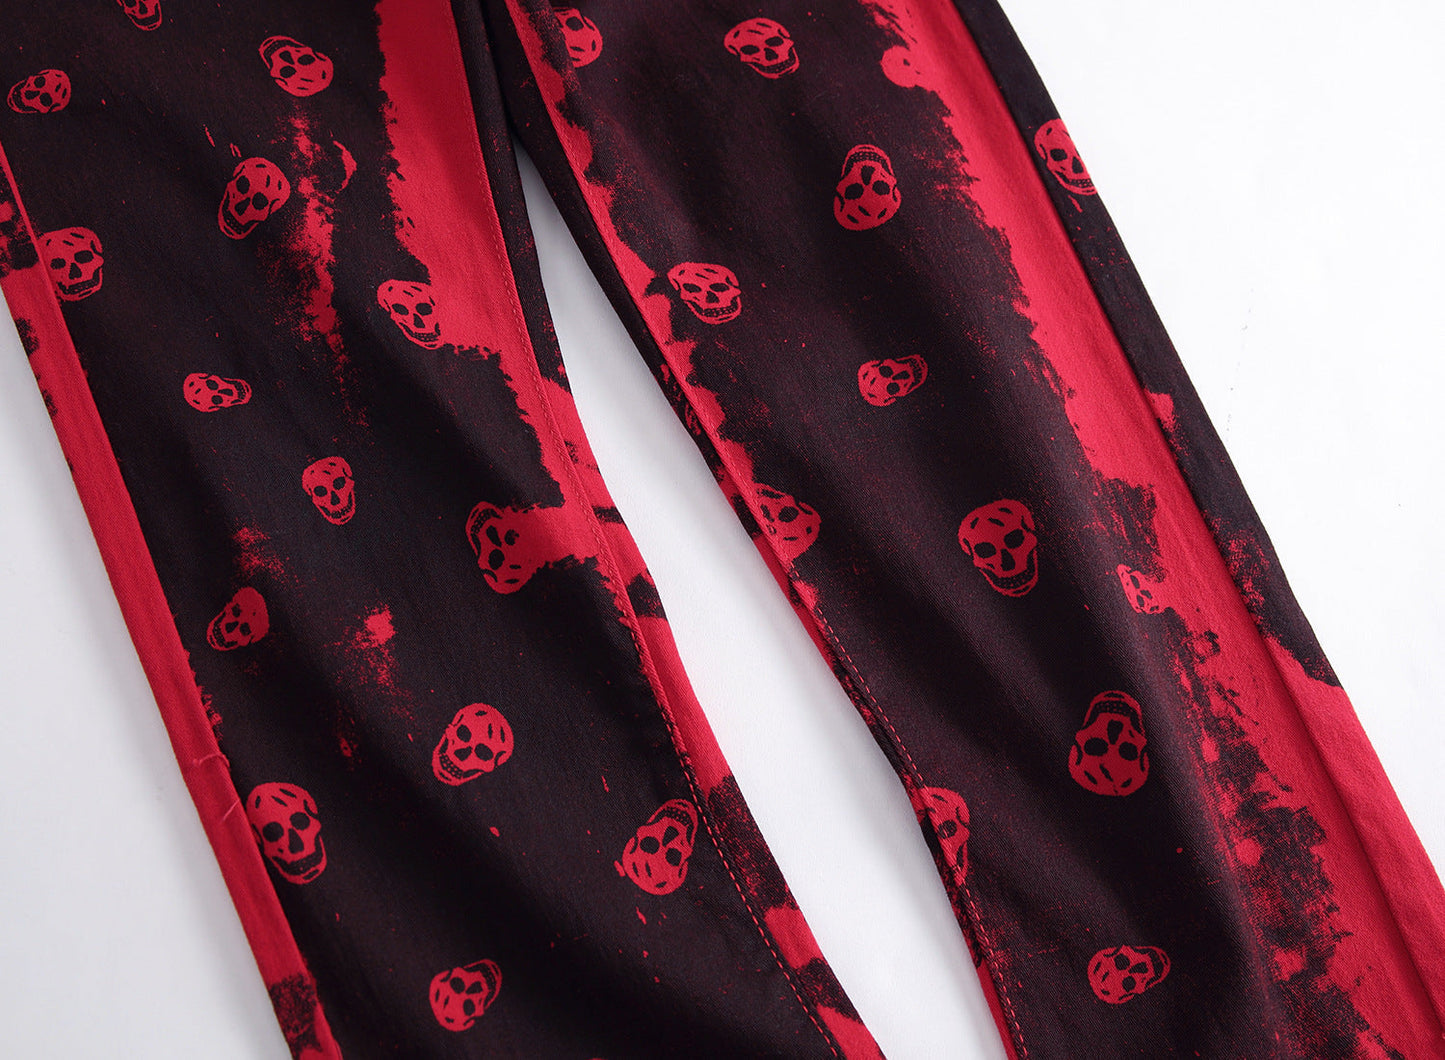 Skull Printed Solid Red Jeans GlamzLife